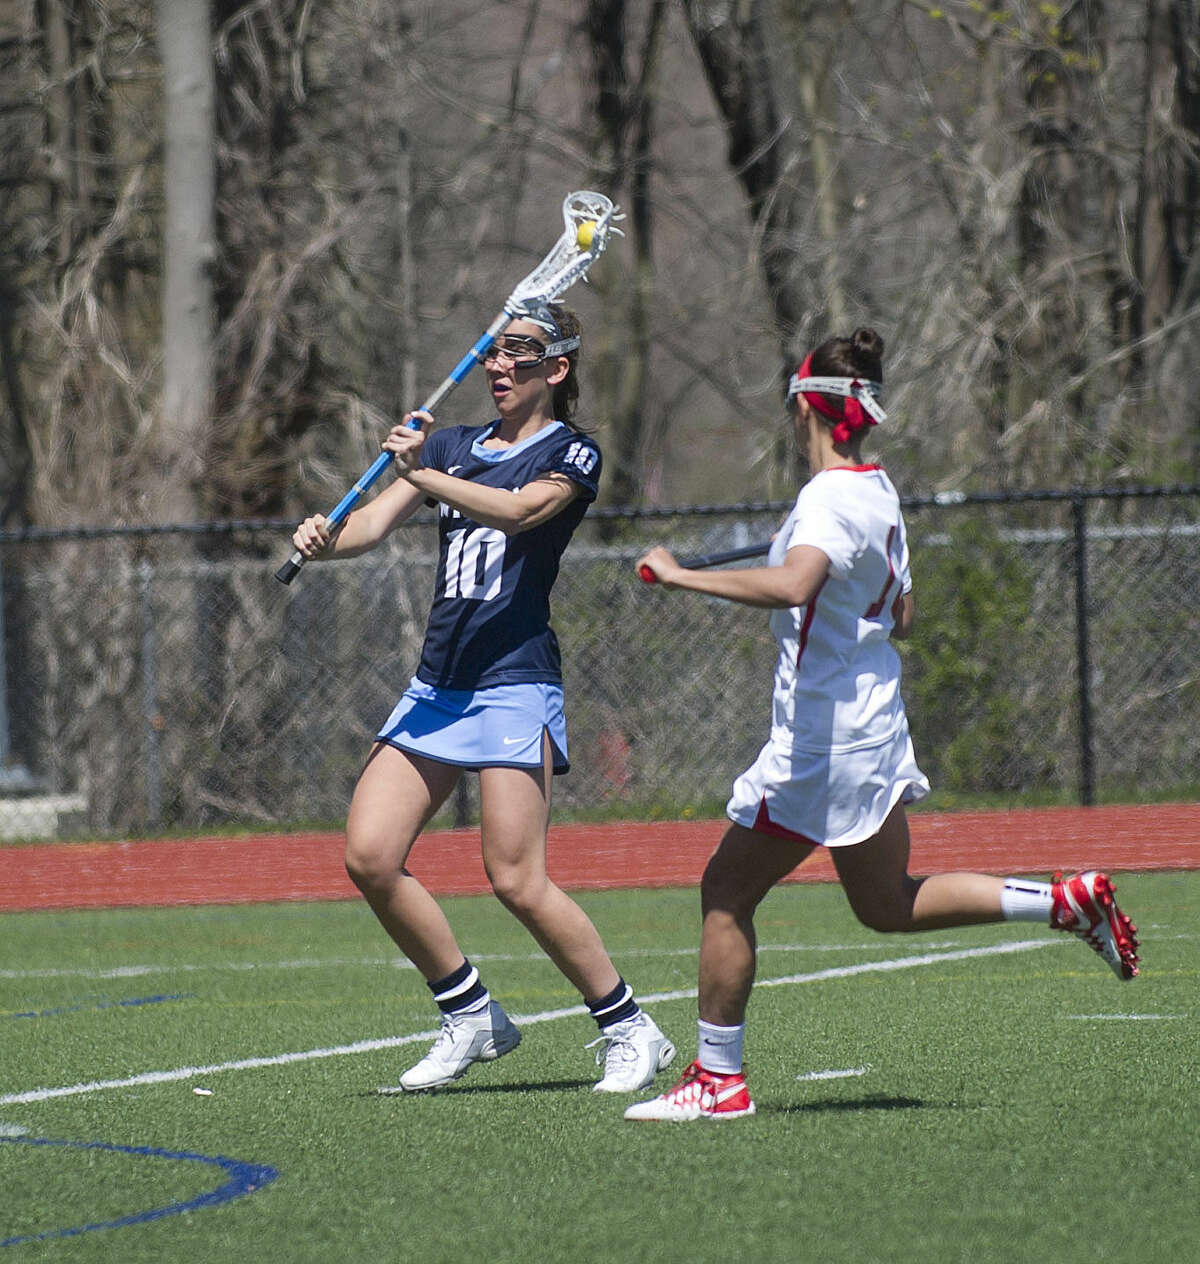 Wilton's Lilla Seymour controls the ball during Saturday's girls lacrosse game against Wilton at Greenwich High School on April 16, 2016.